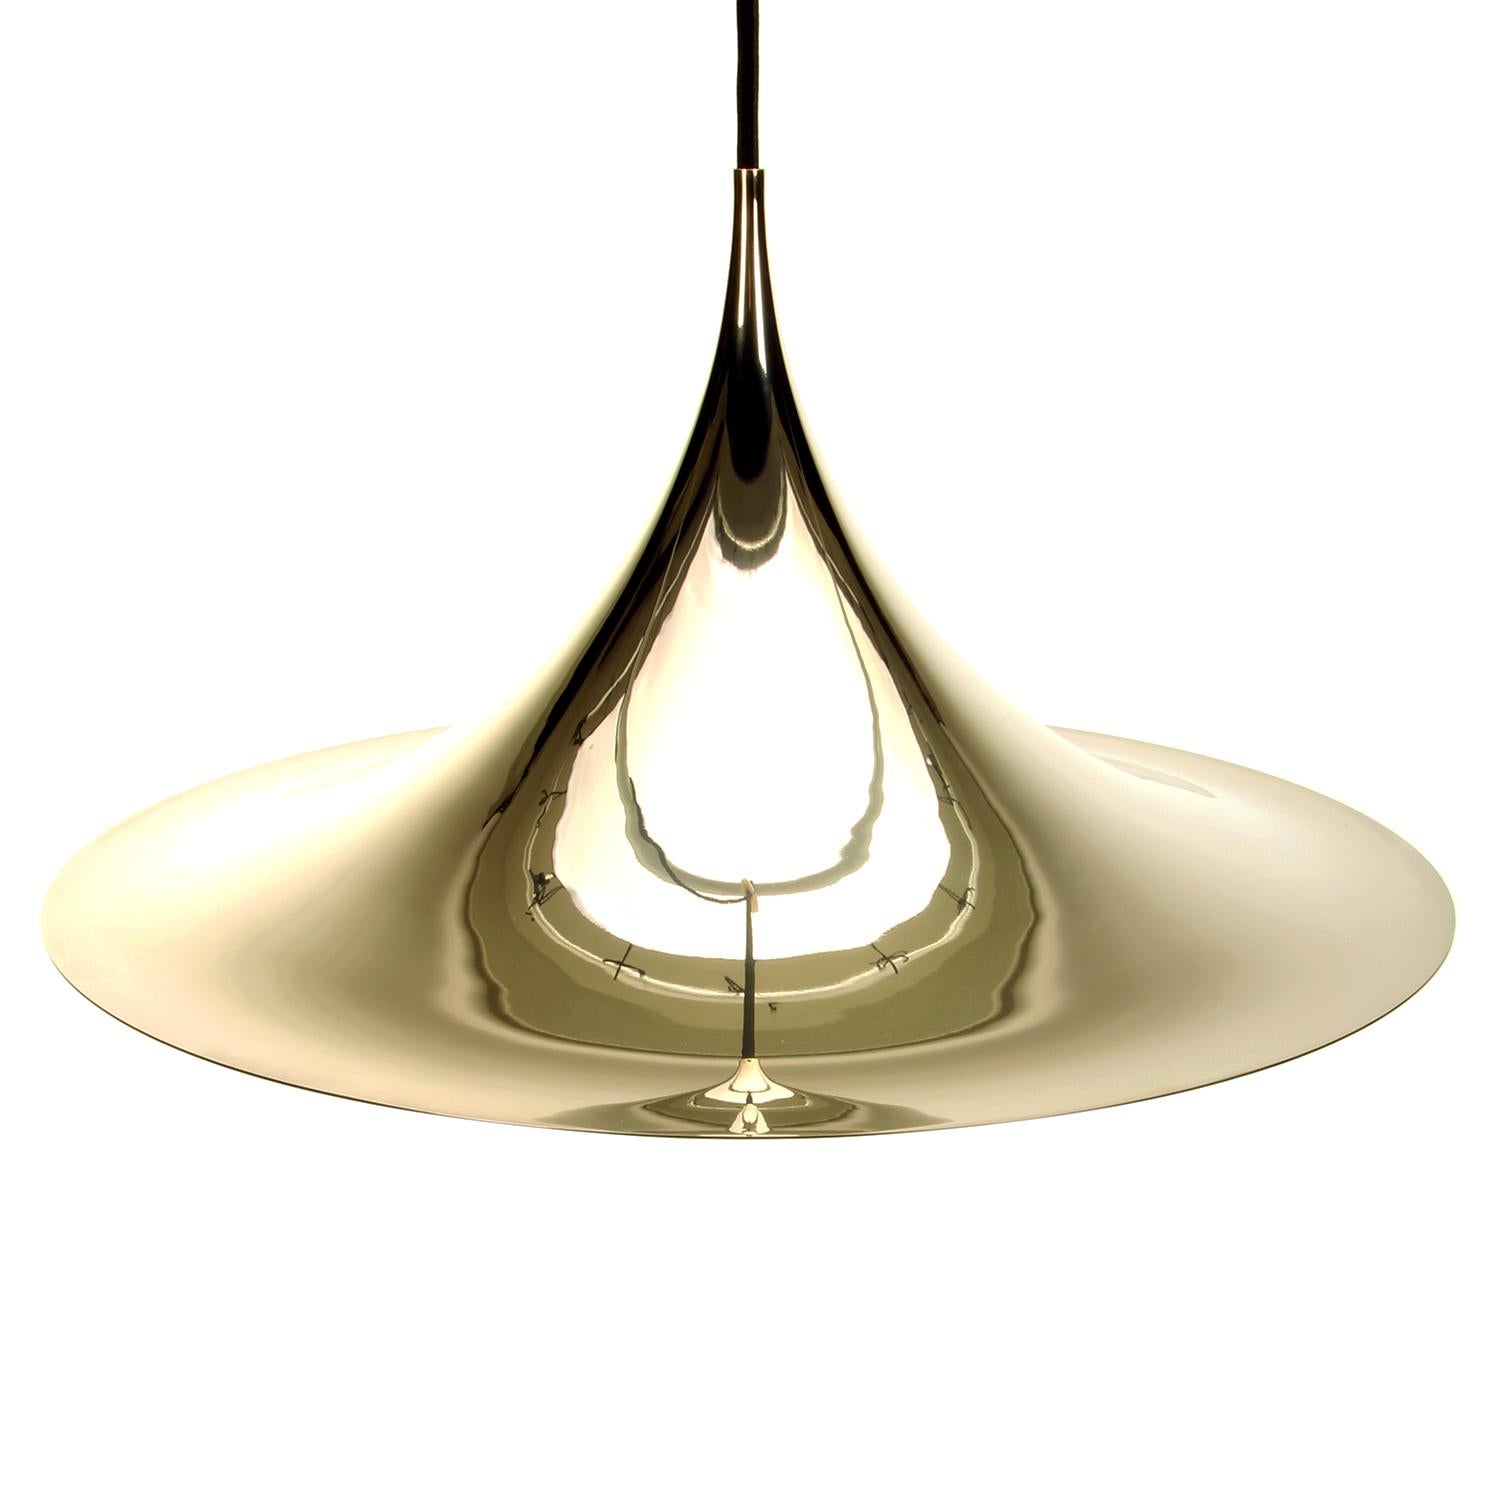 Semi Gold-Plated Pendant by Claus Bonderup and Torsten Thorup 1968 Fog & Morup (Lackiert)